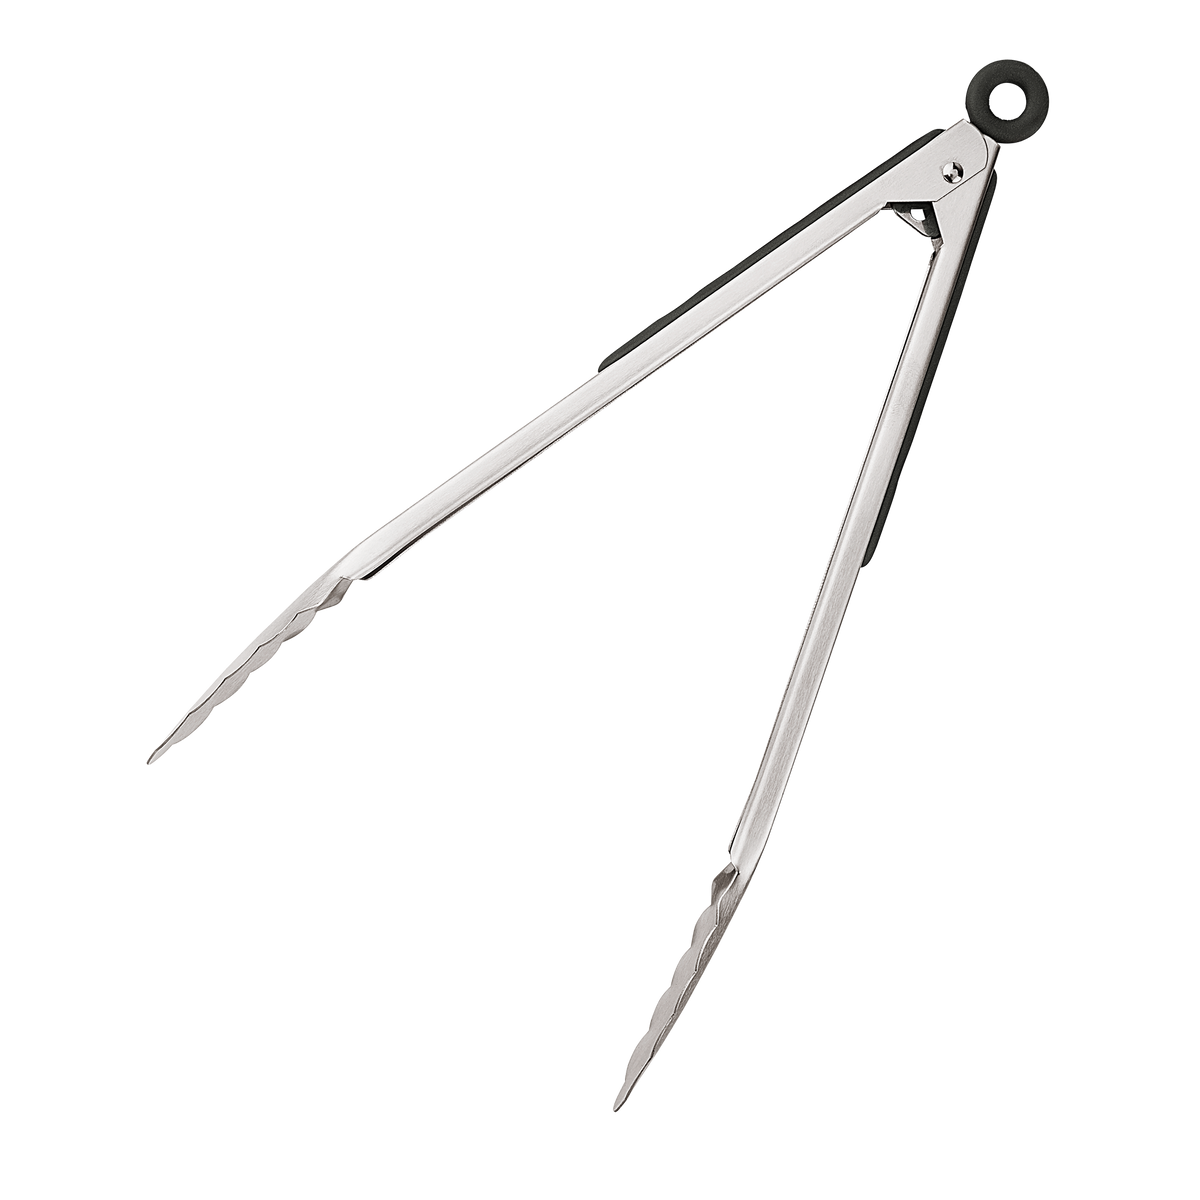 Product photo, side view, 12 inch stainless steel tongs in their open position.